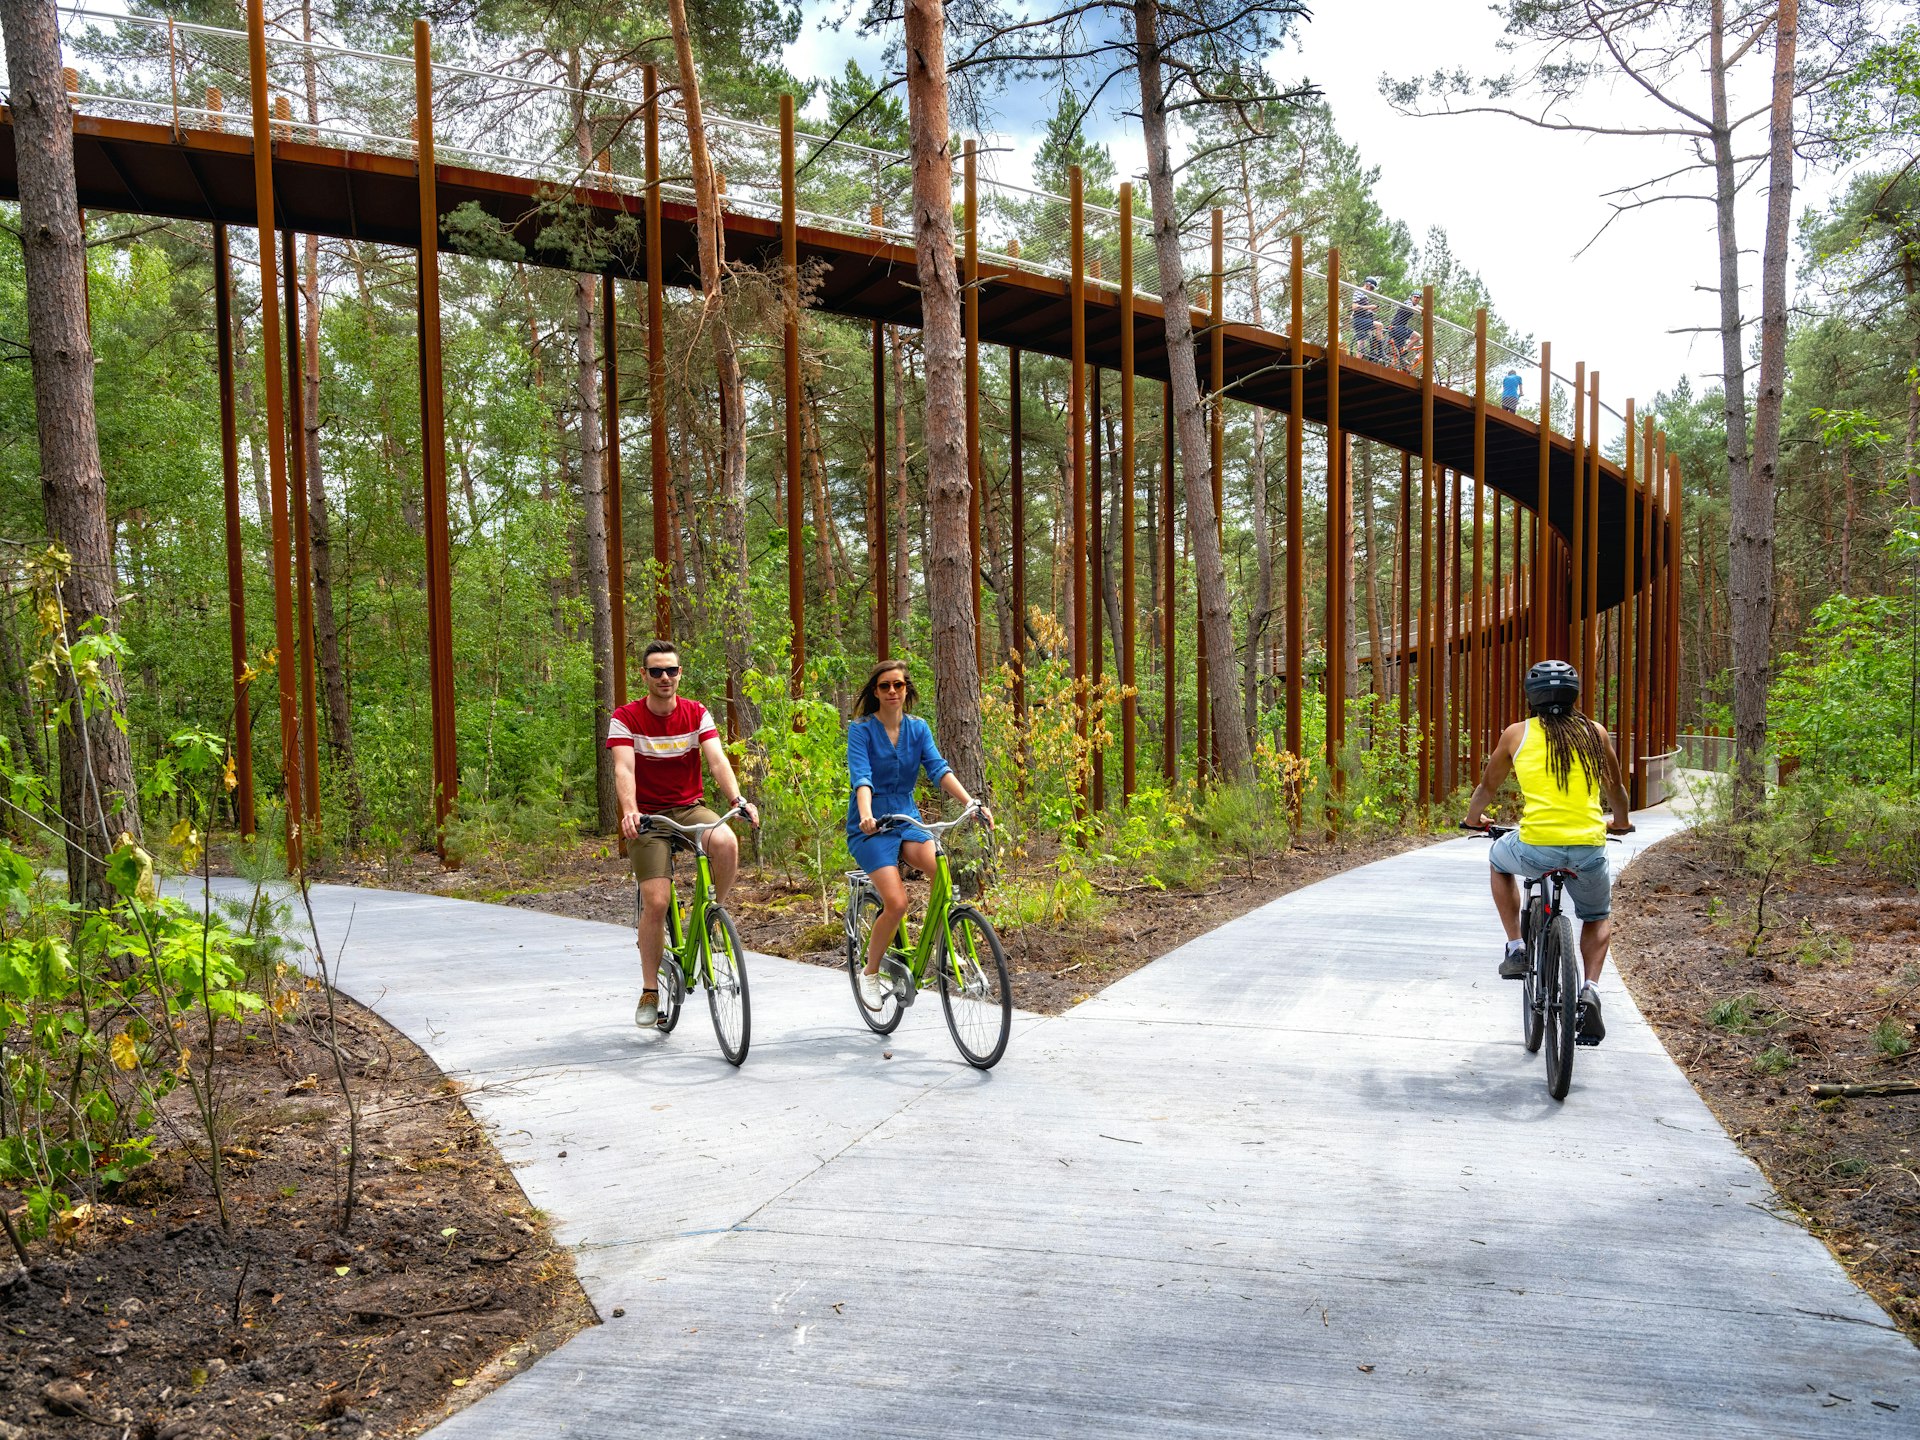 A two-lane cycle trail running through a canopy of trees